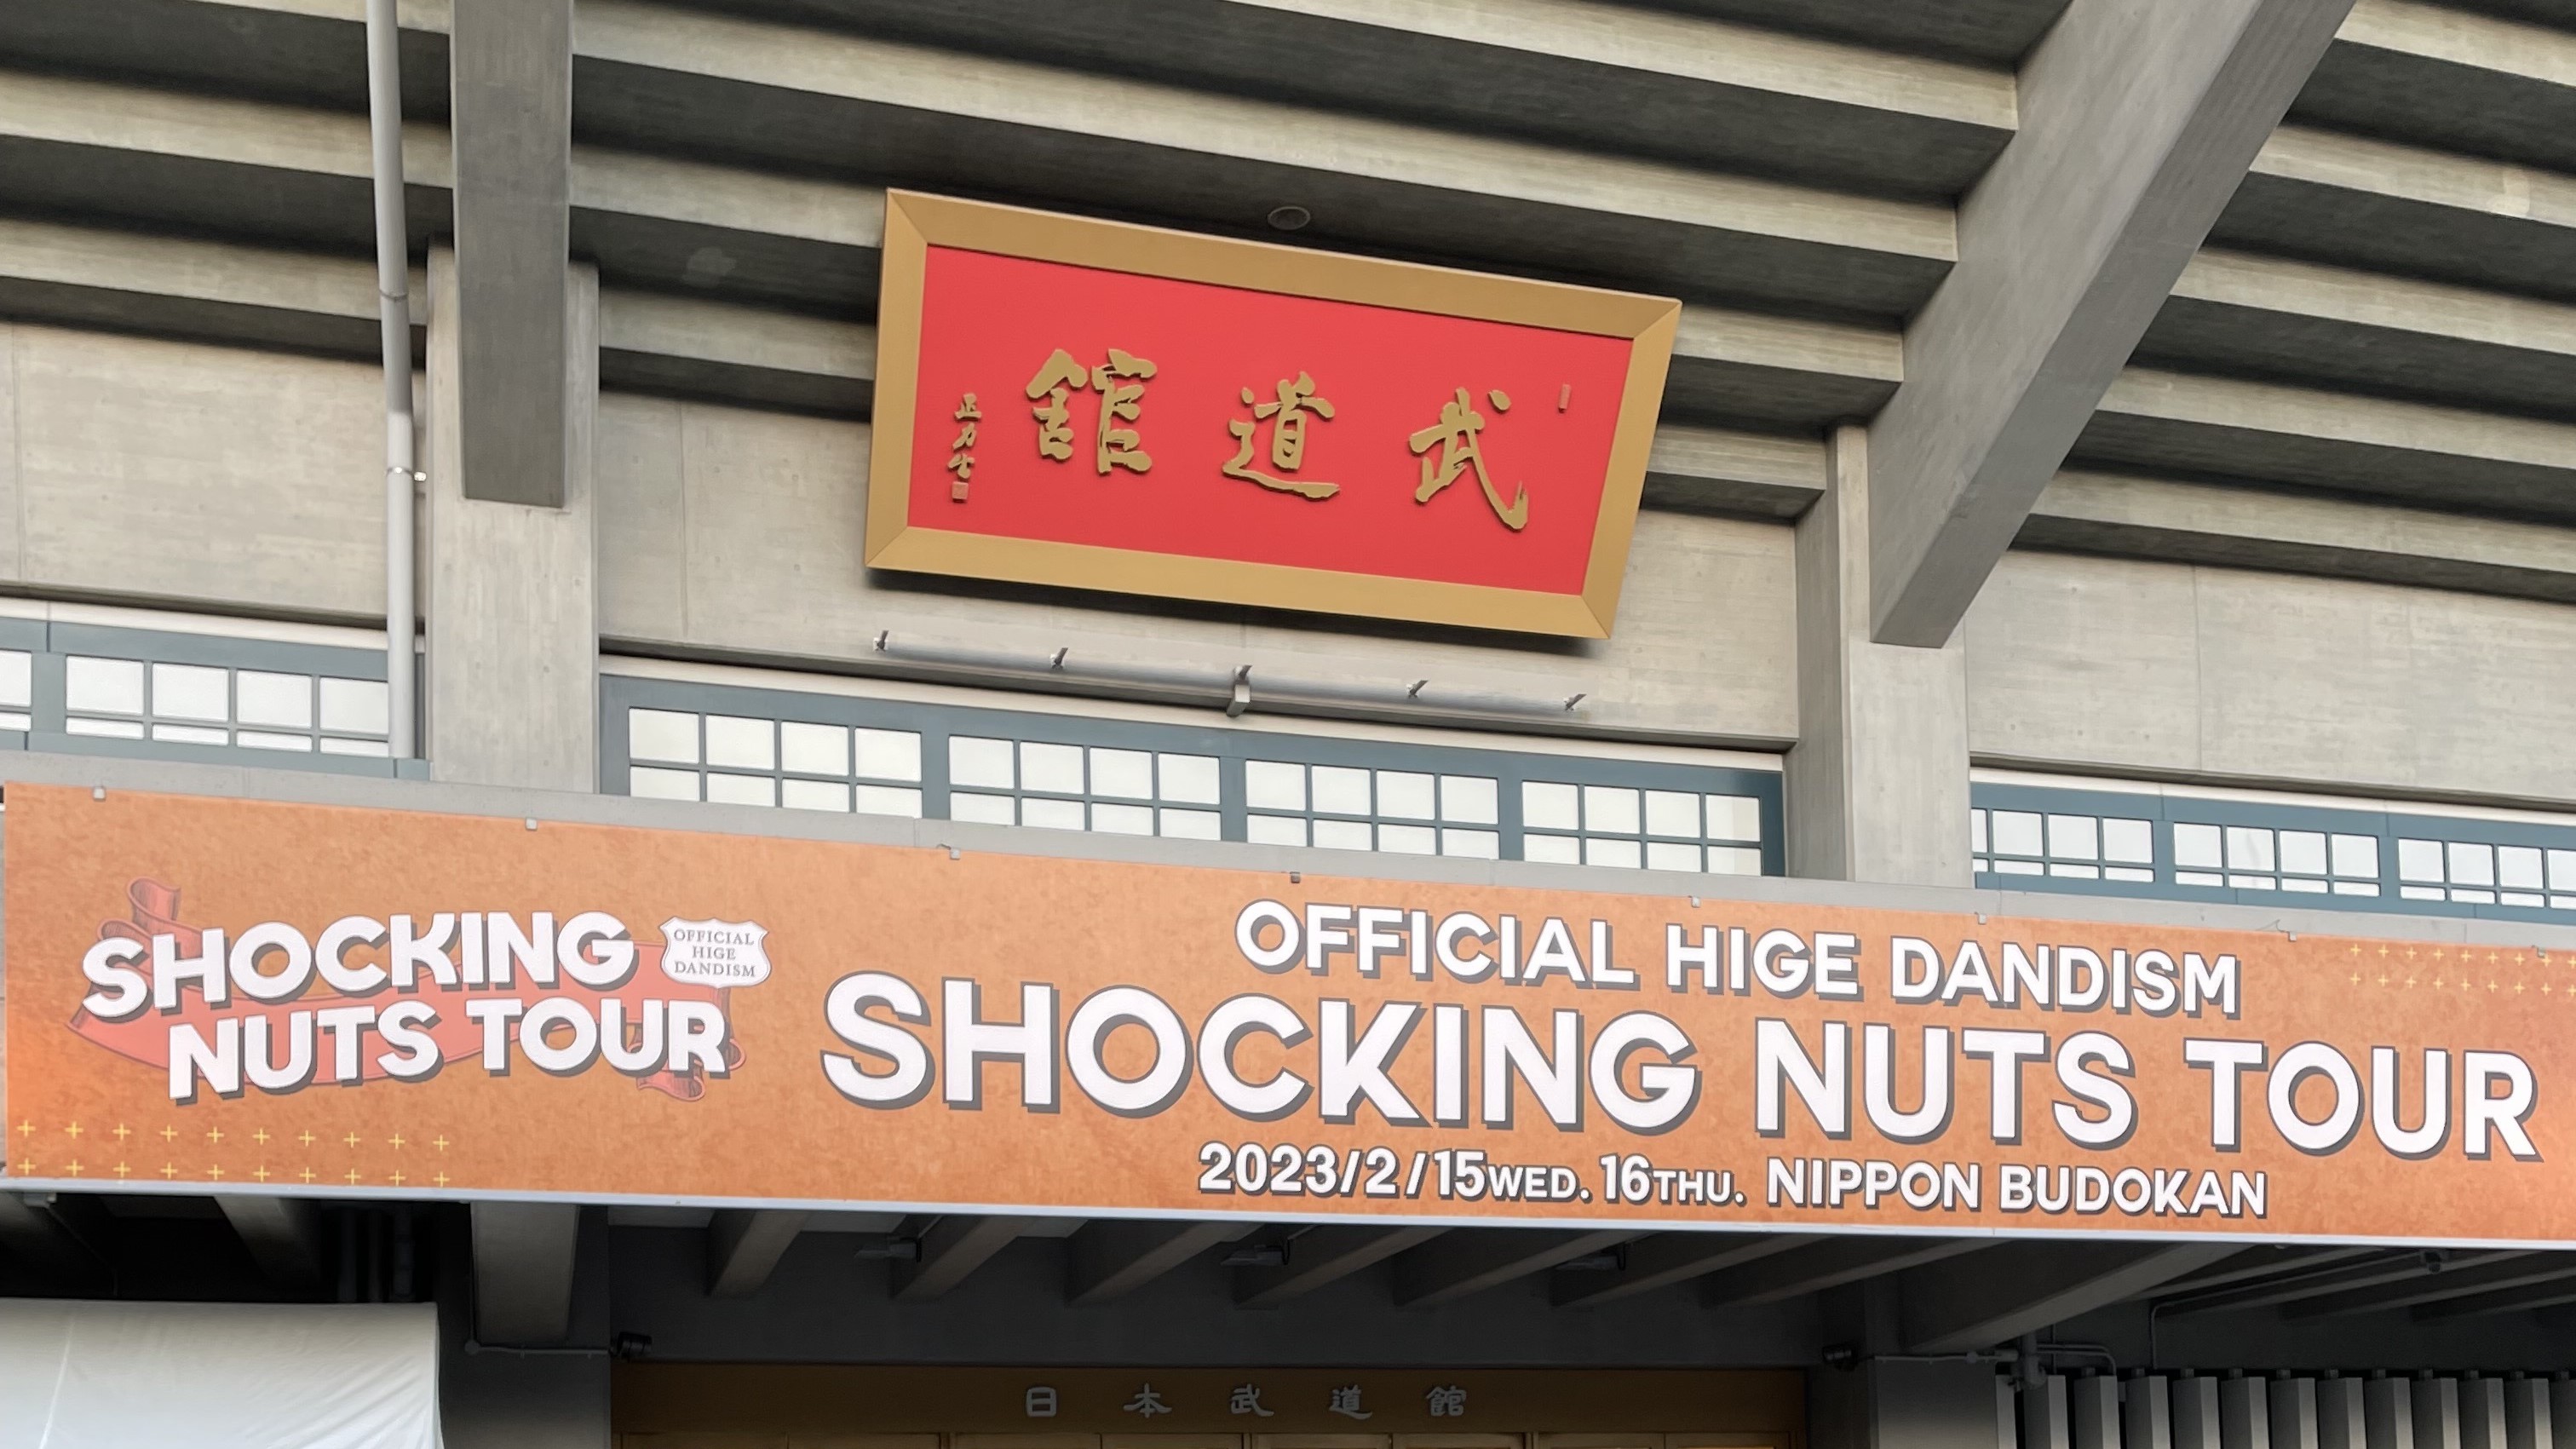 Official髭男dism SHOCKING NUTS TOUR ＠日本武道館 2/16 に行ってきました！